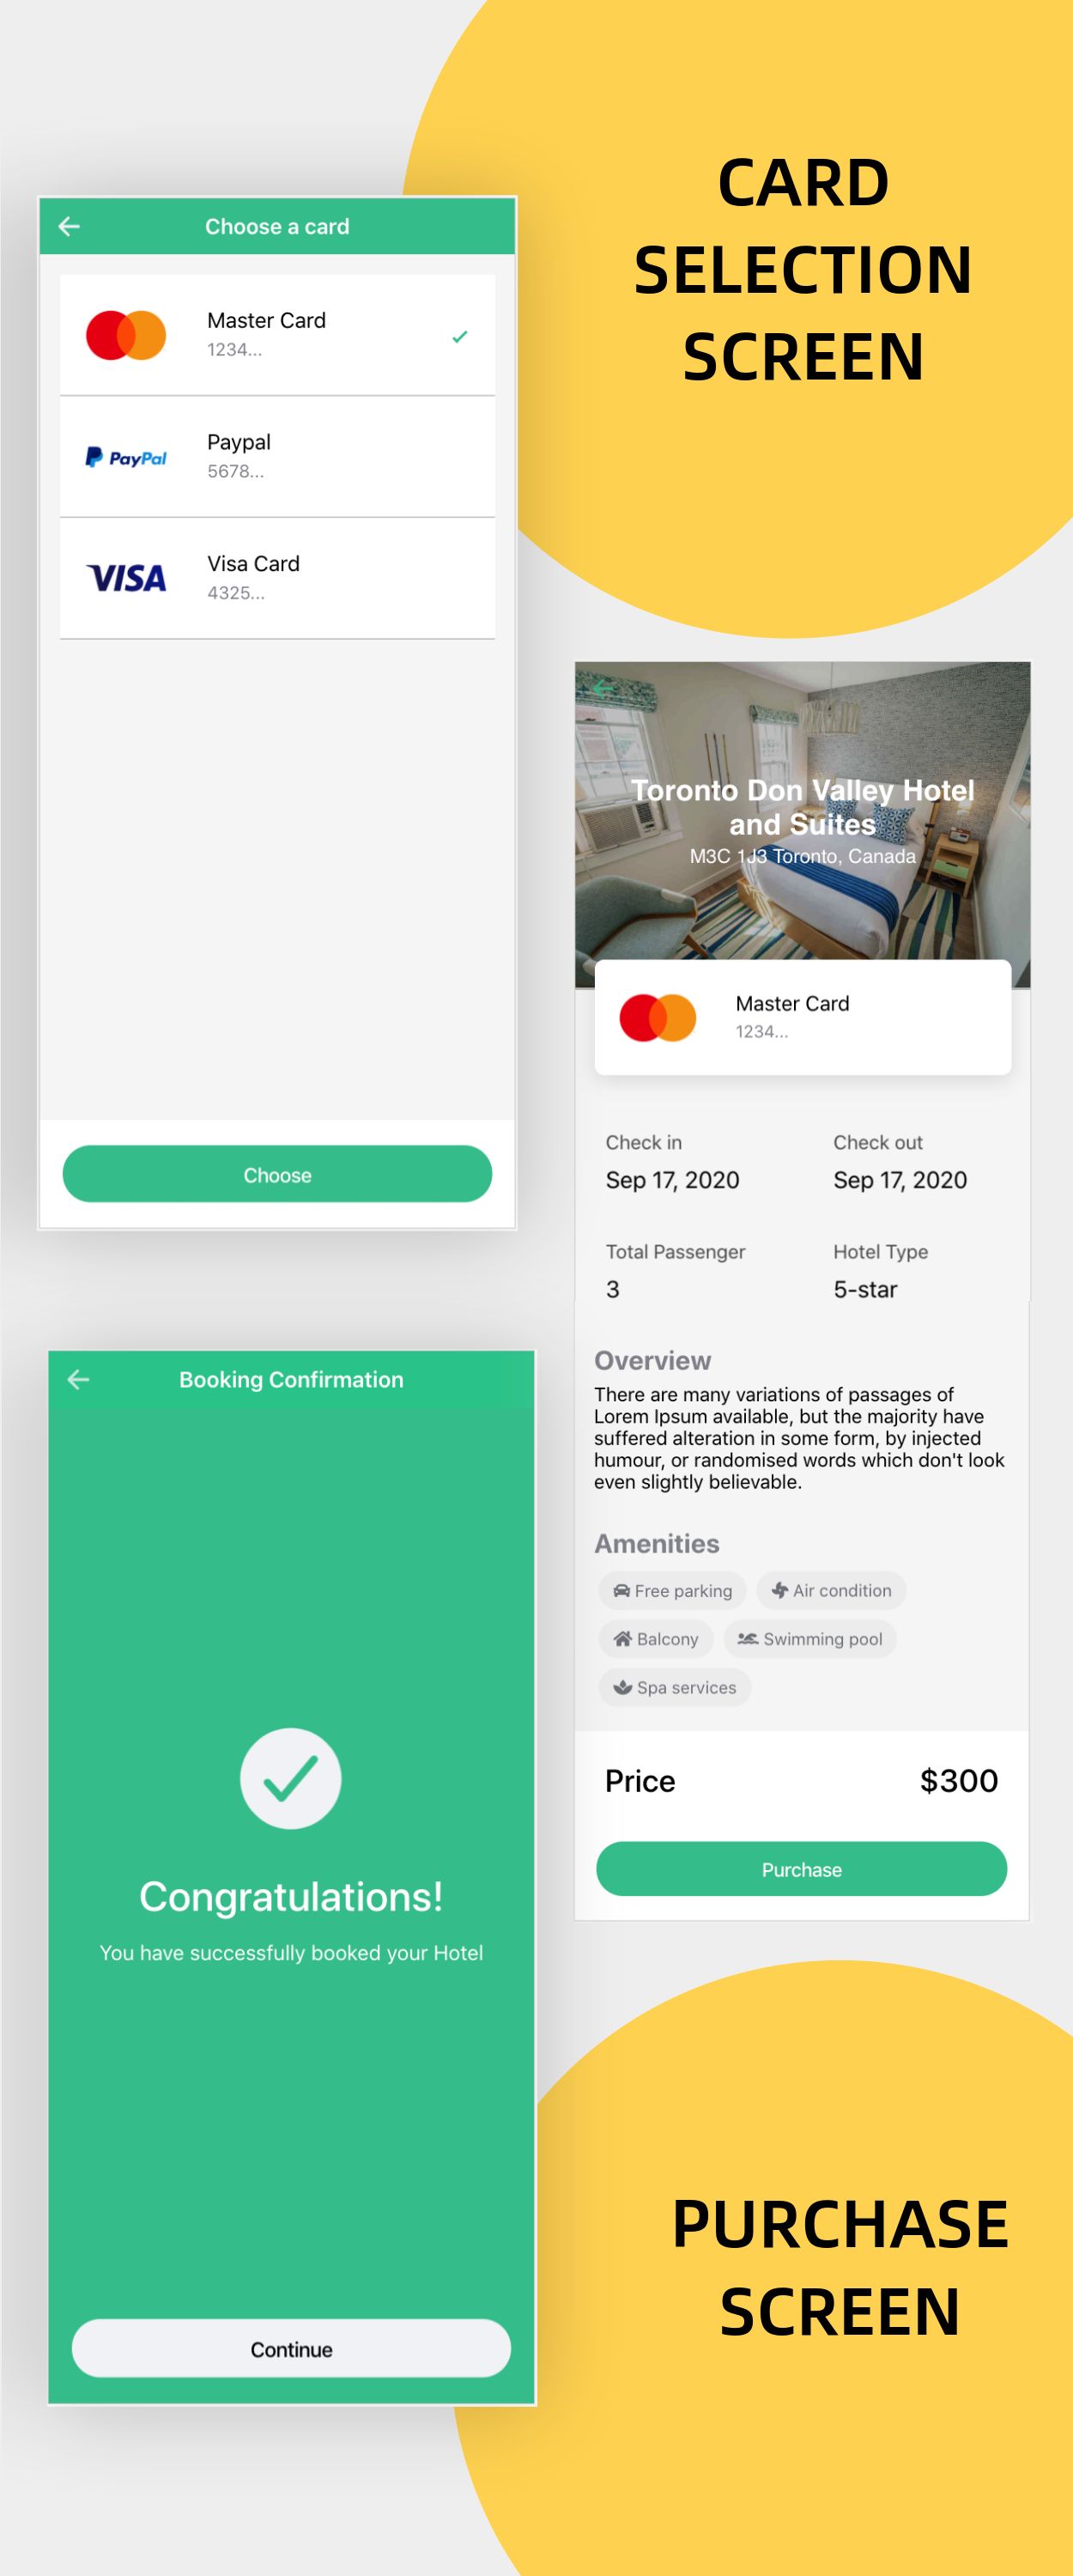 Hillside - A Hotel Booking Theme UI App By Ionic 5 Angular 9 (Latest) - 8